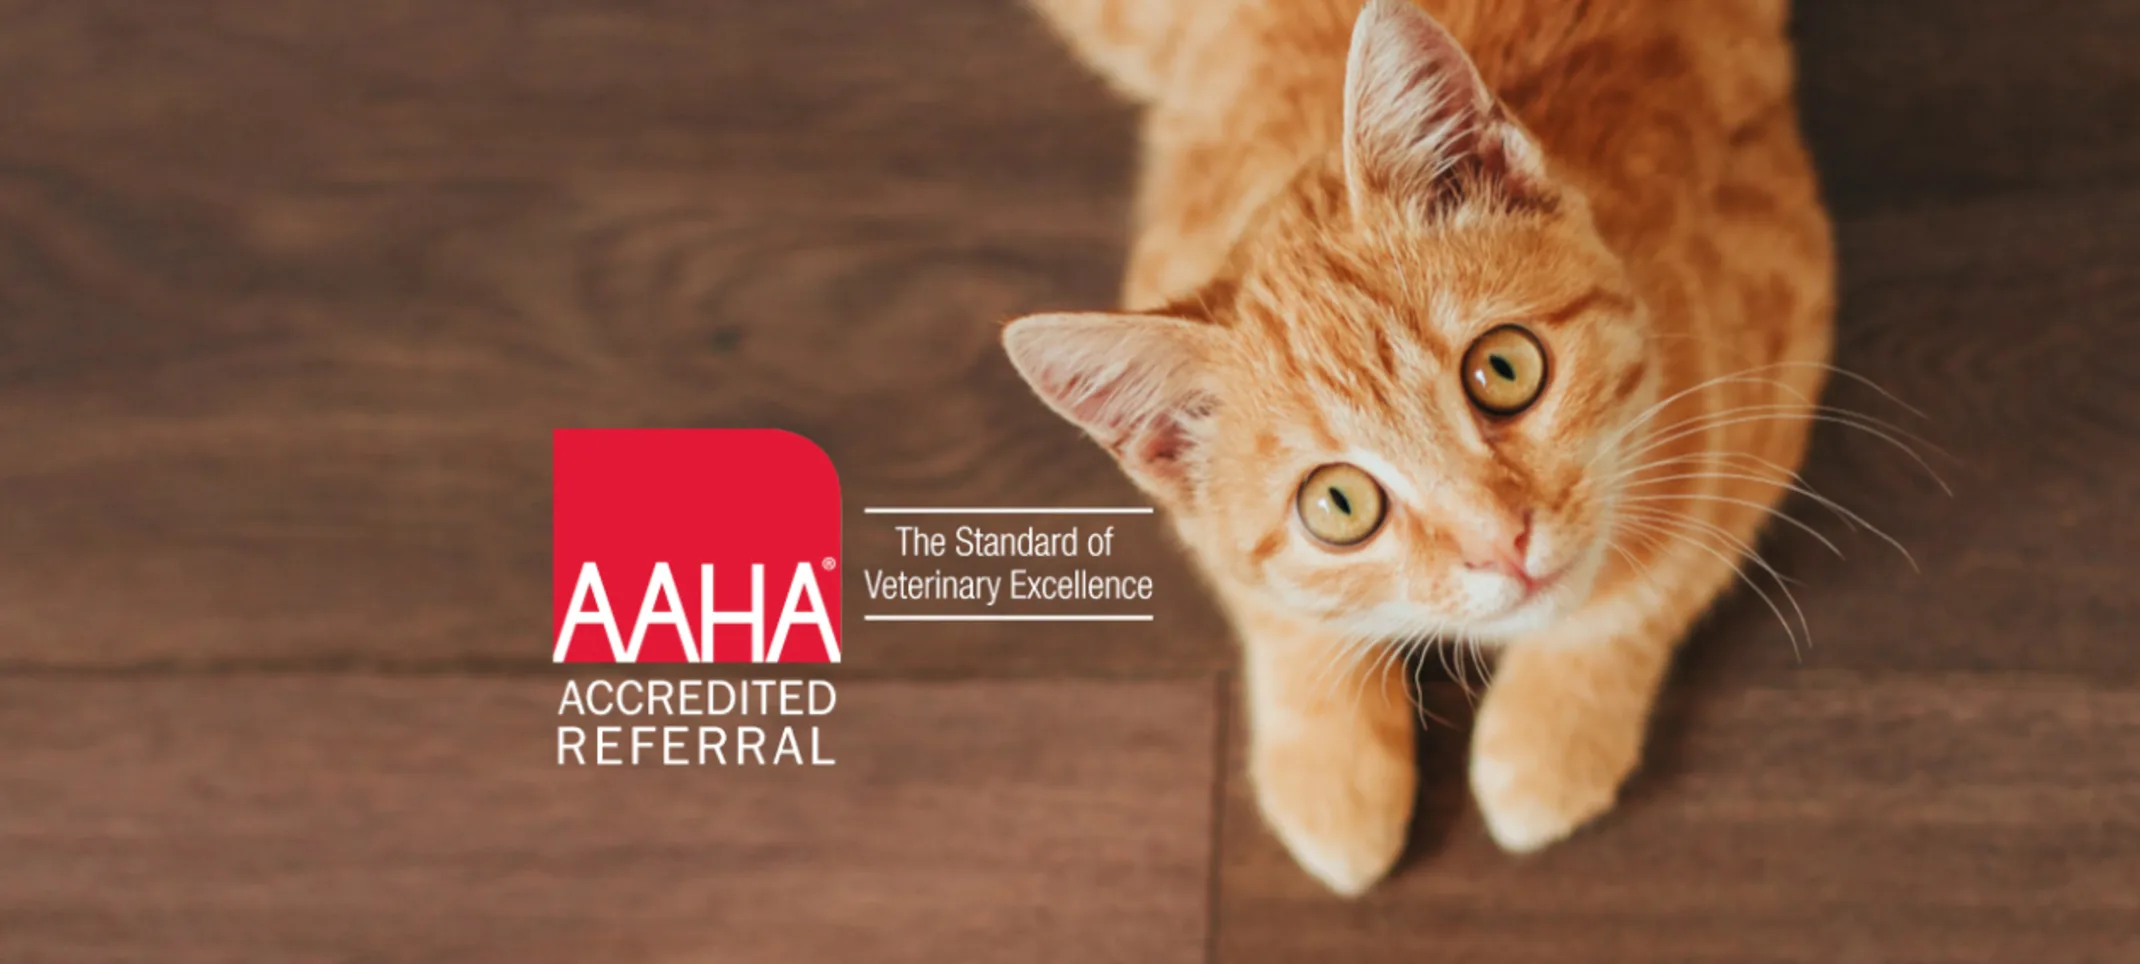 Orange Cat Lying Down Looking Up next to AAHA Accredited Referral Logo